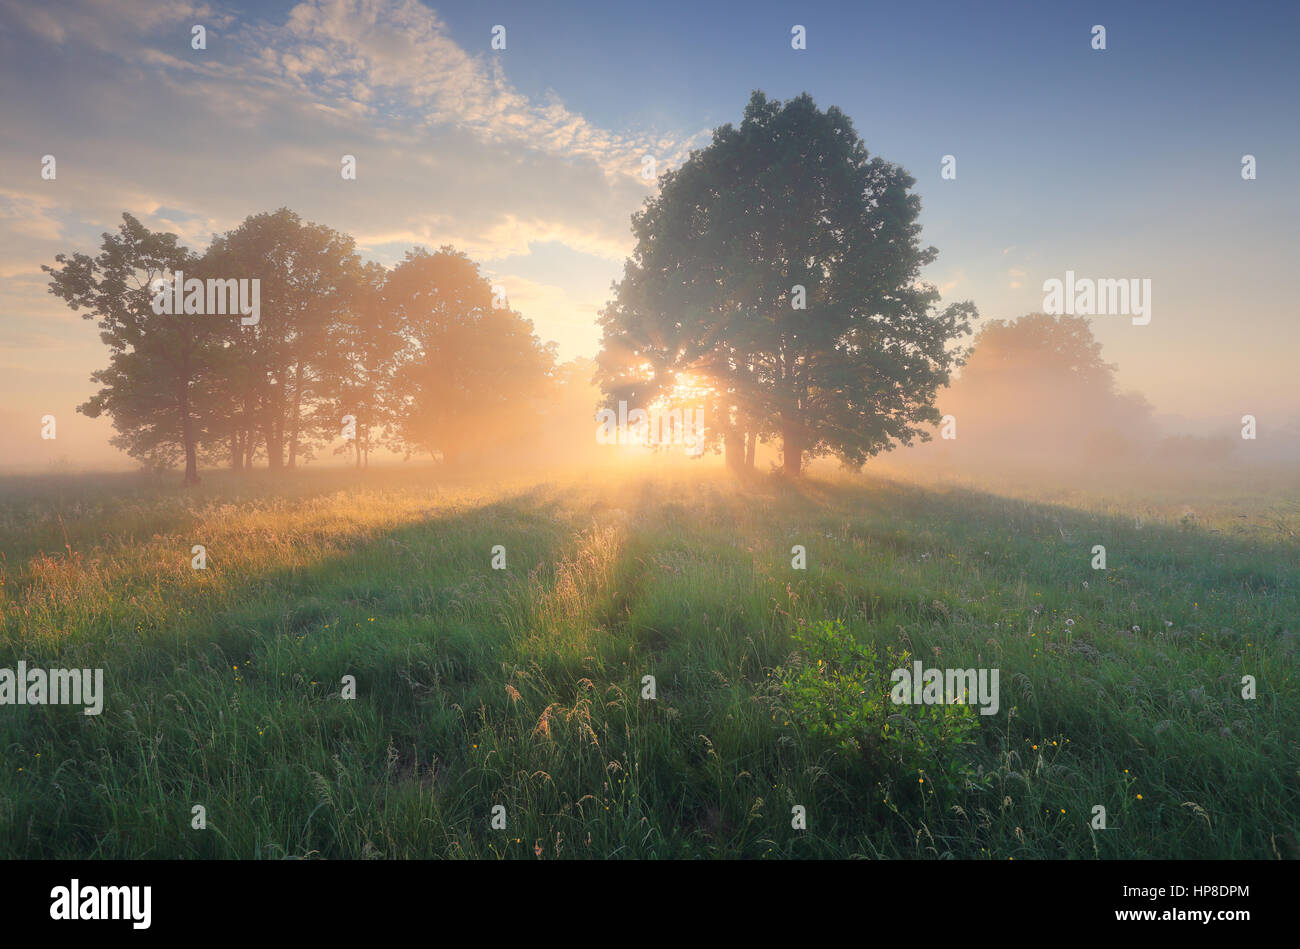 Morning sun shine through tree on blossom meadow. Bright sunbeams illuminate green grass on field. Colorful spring sunrise over meadow. Stock Photo